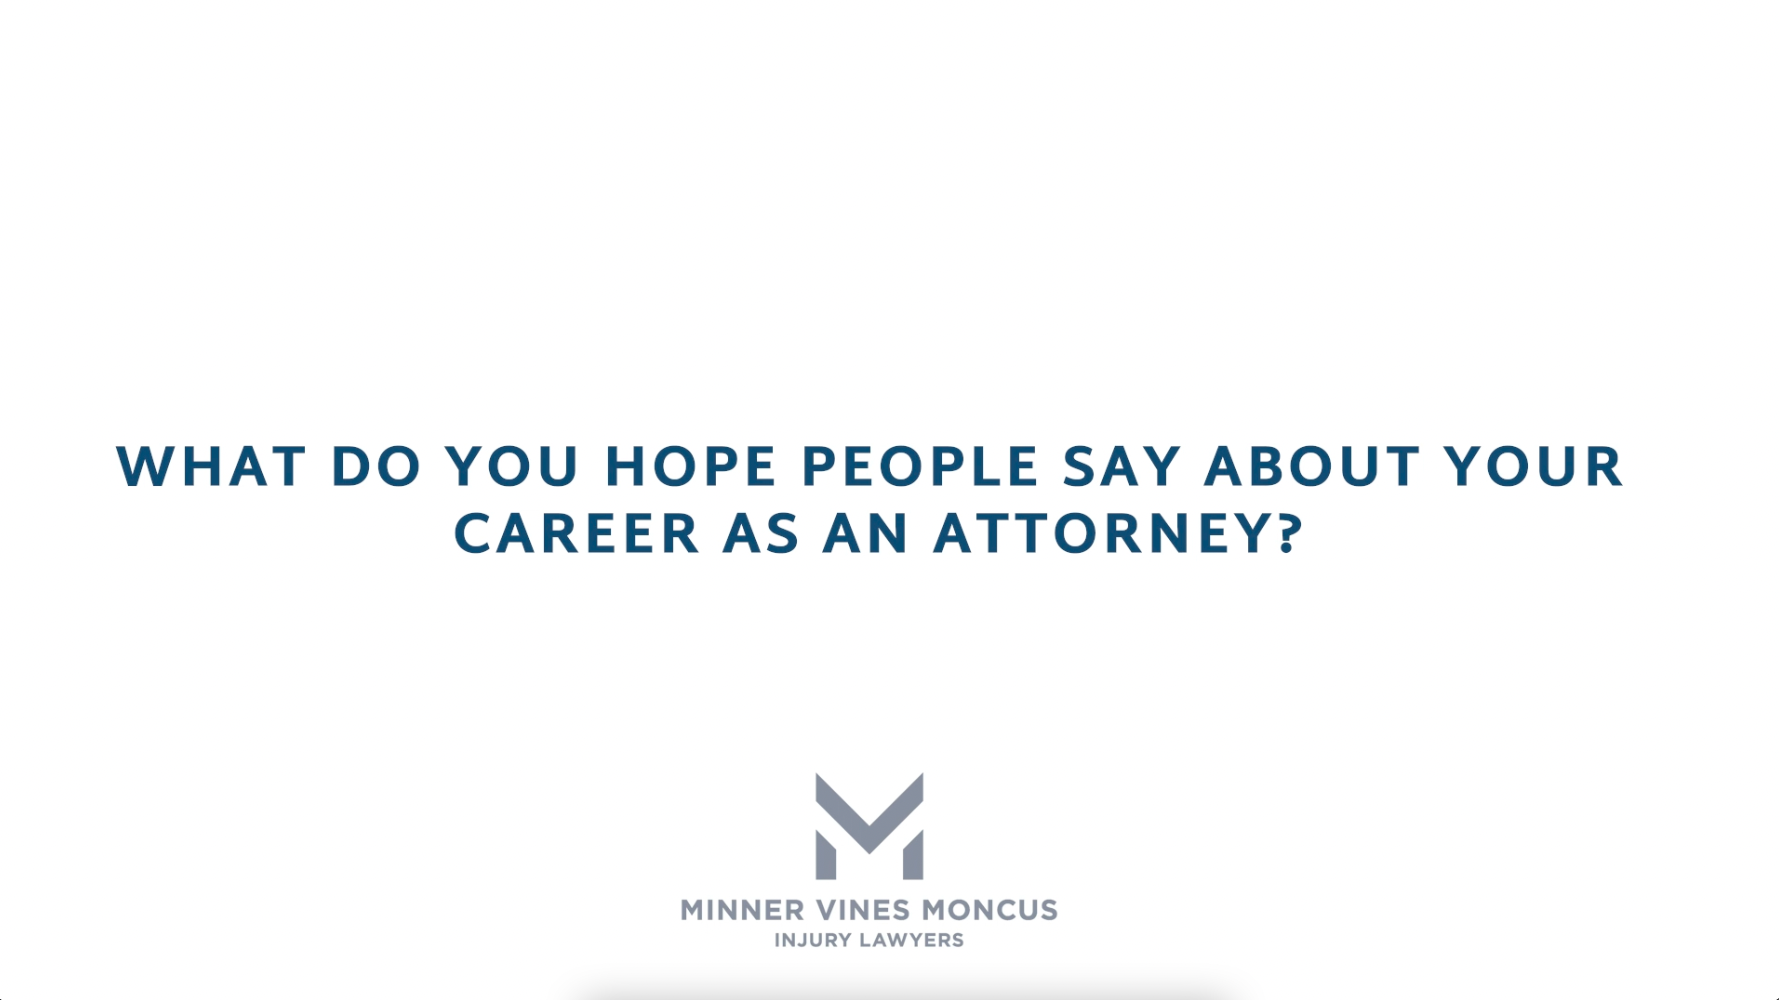 What do you hope people say about your career as an attorney?